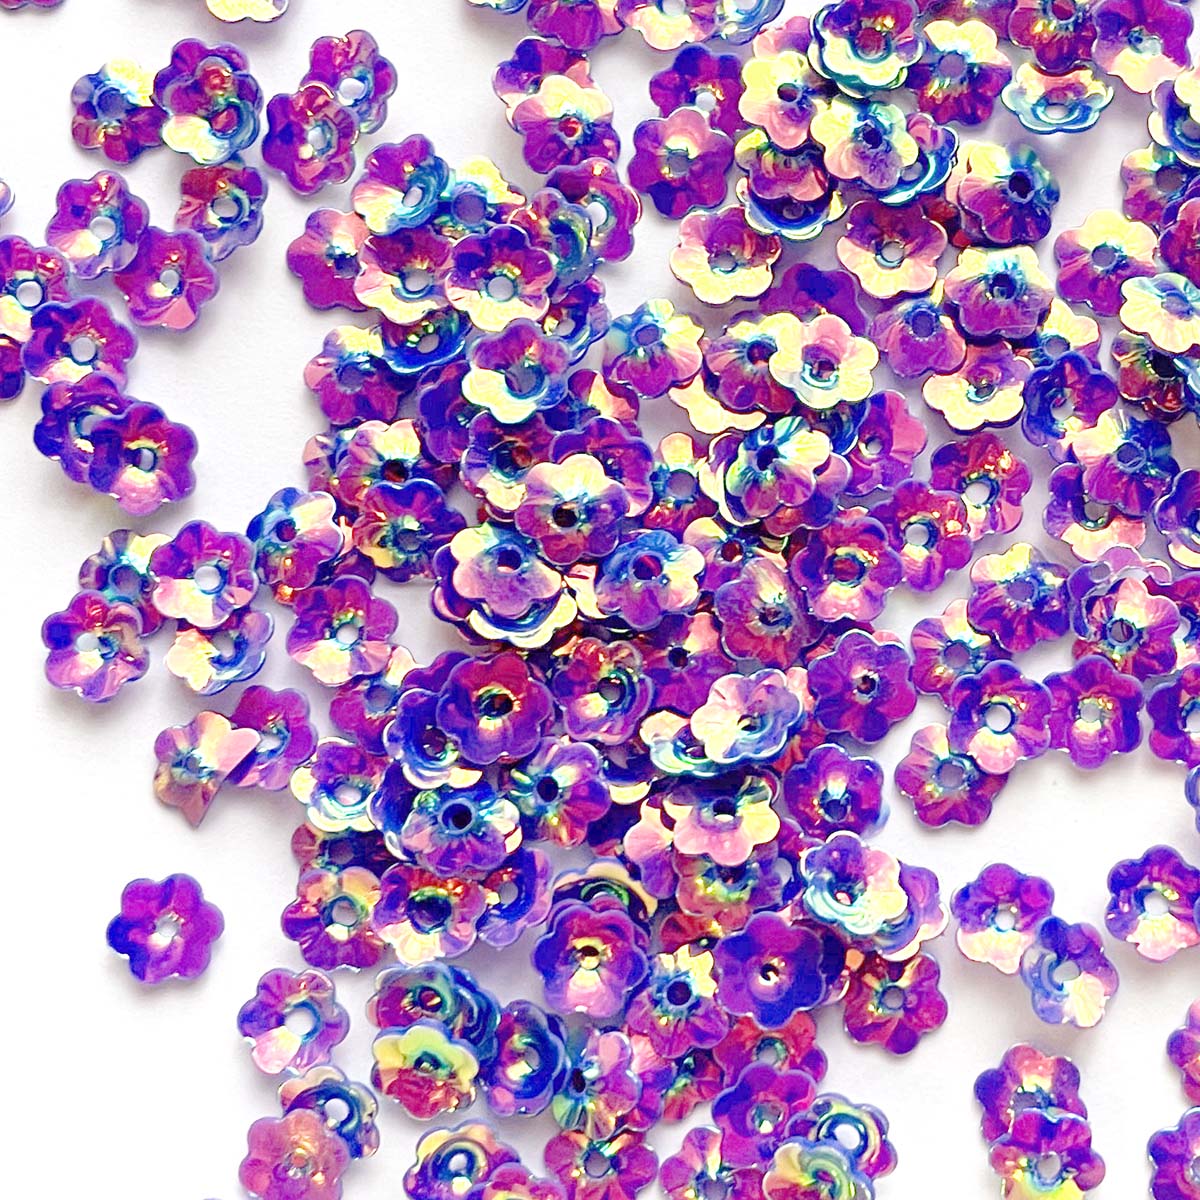 www.colourstreams.com.au Colour Streams Sequins Embellishments Costumes Mardi Gras Dancing Ballet Theatre Shows Drag Queen Bling Australia USA NZ Canada Costuming Stitching Embroidery Opaque Flower Shape Iridescent Reflections Pink with Purple, Gold and Green Green Lights 6mm S297